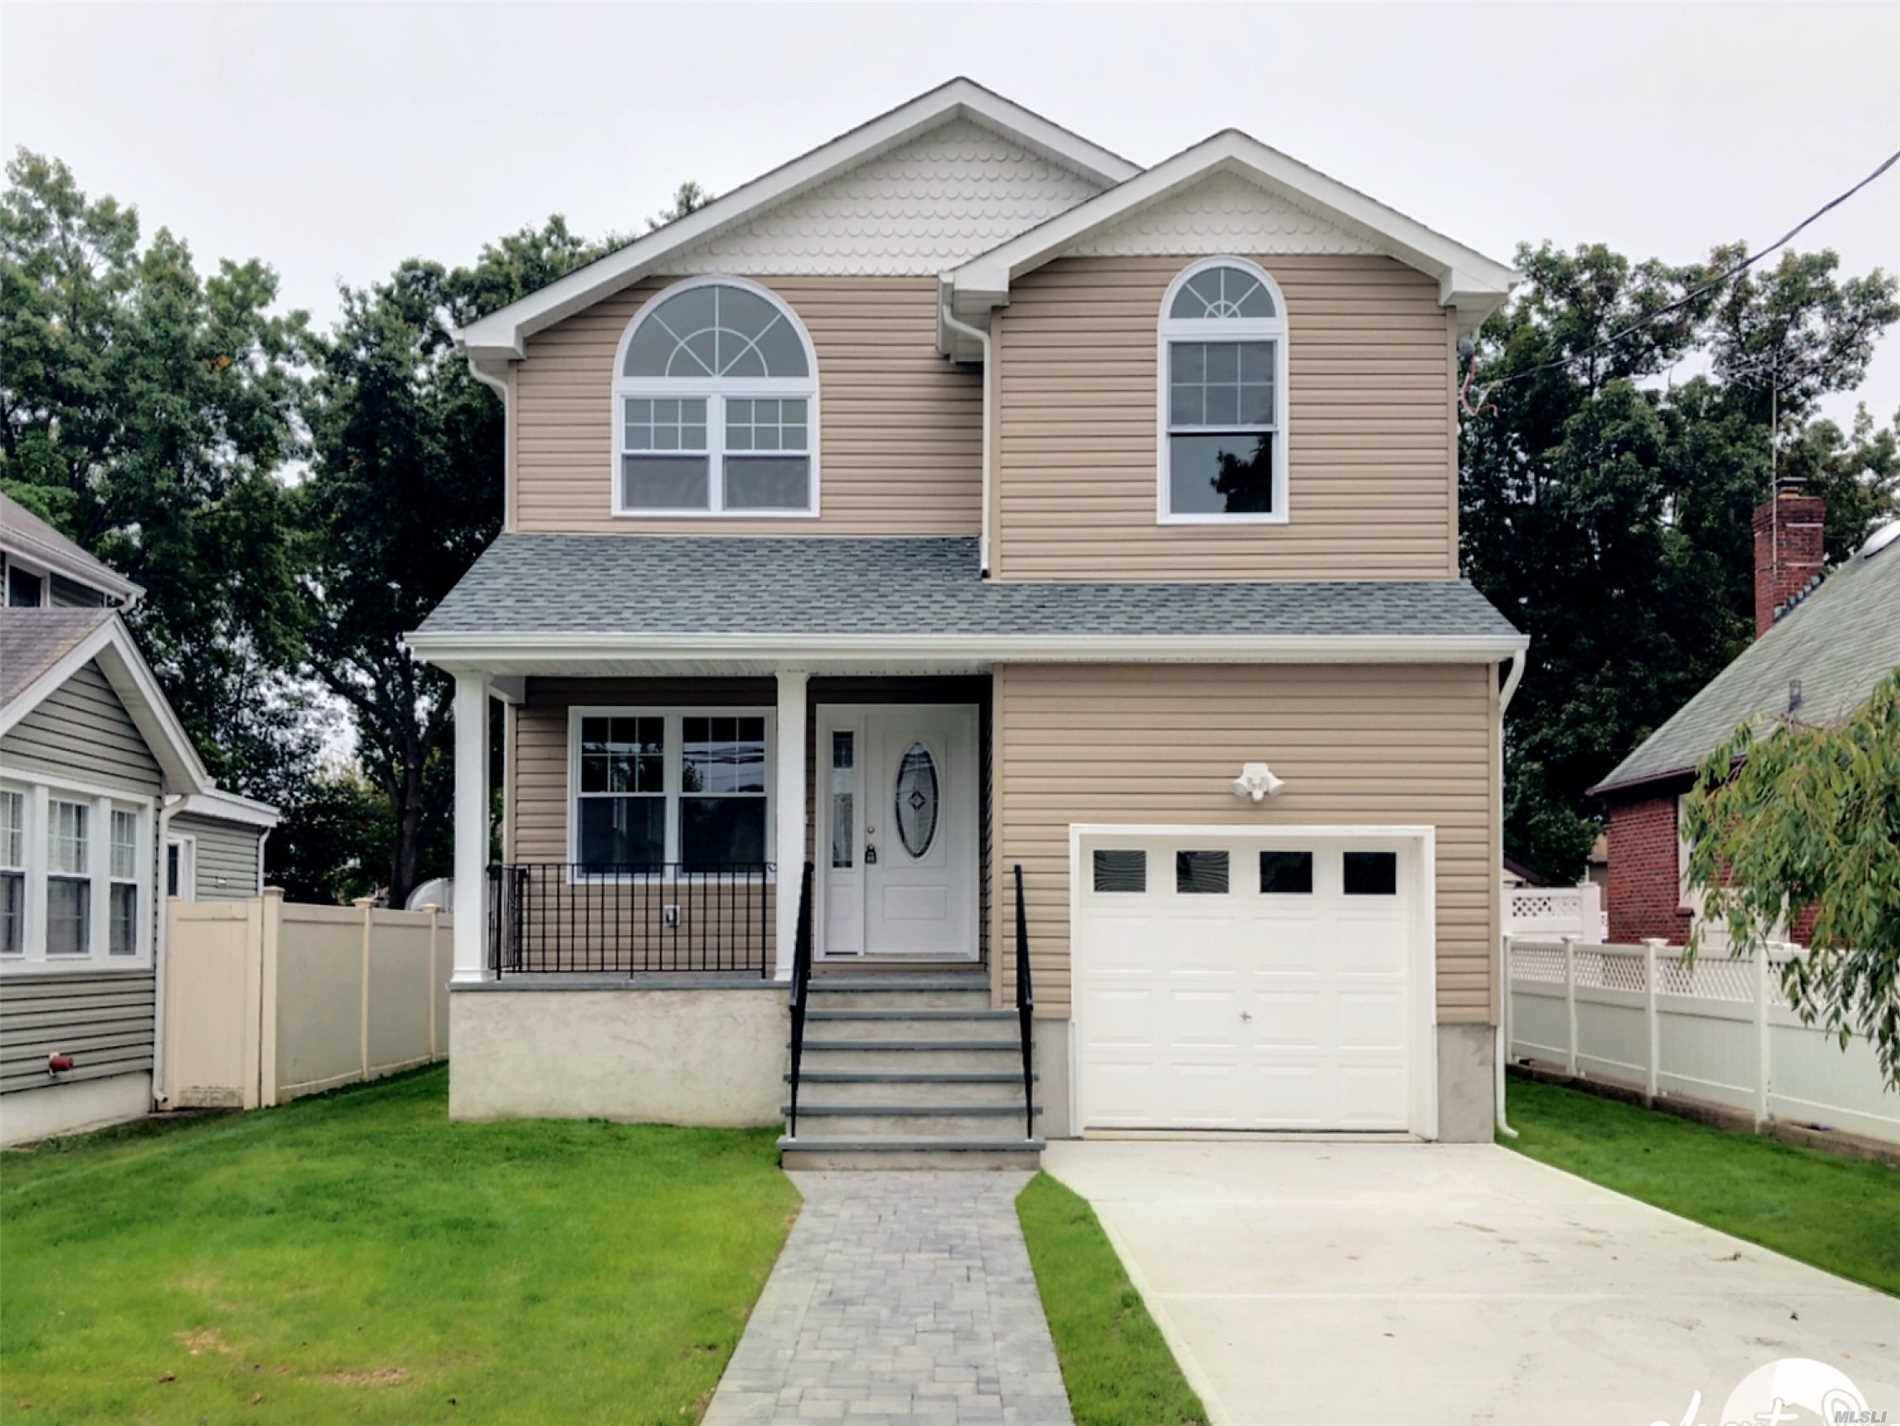 Wow...Totally Brand New Colonial Style Home W/ Apprx 2400 Sqft Of Living Space & A Beautiful Front Porch In The Village Of Lynbrook! This House Is All Custom Built & Features 4 Bdr&rsquo;s, 3 Full Baths, Kitchen W/Granite Ctrps/Ss Appl, Mbr Suite W/ 2 Wic&rsquo;s/New Designer Full Bath, Cathedral Ceilings In 3 Bdrs, Gleaming Hardwood Flrs Thruout, Den Off Kitchen, Huge Unfinished Basement W/ High Ceilings, 2-Zone Hvac Syst (Cac & Ha), Crown Moldings, Pvc Fencing, Beautiful Pavers, Pvt Drvy & So Much More!